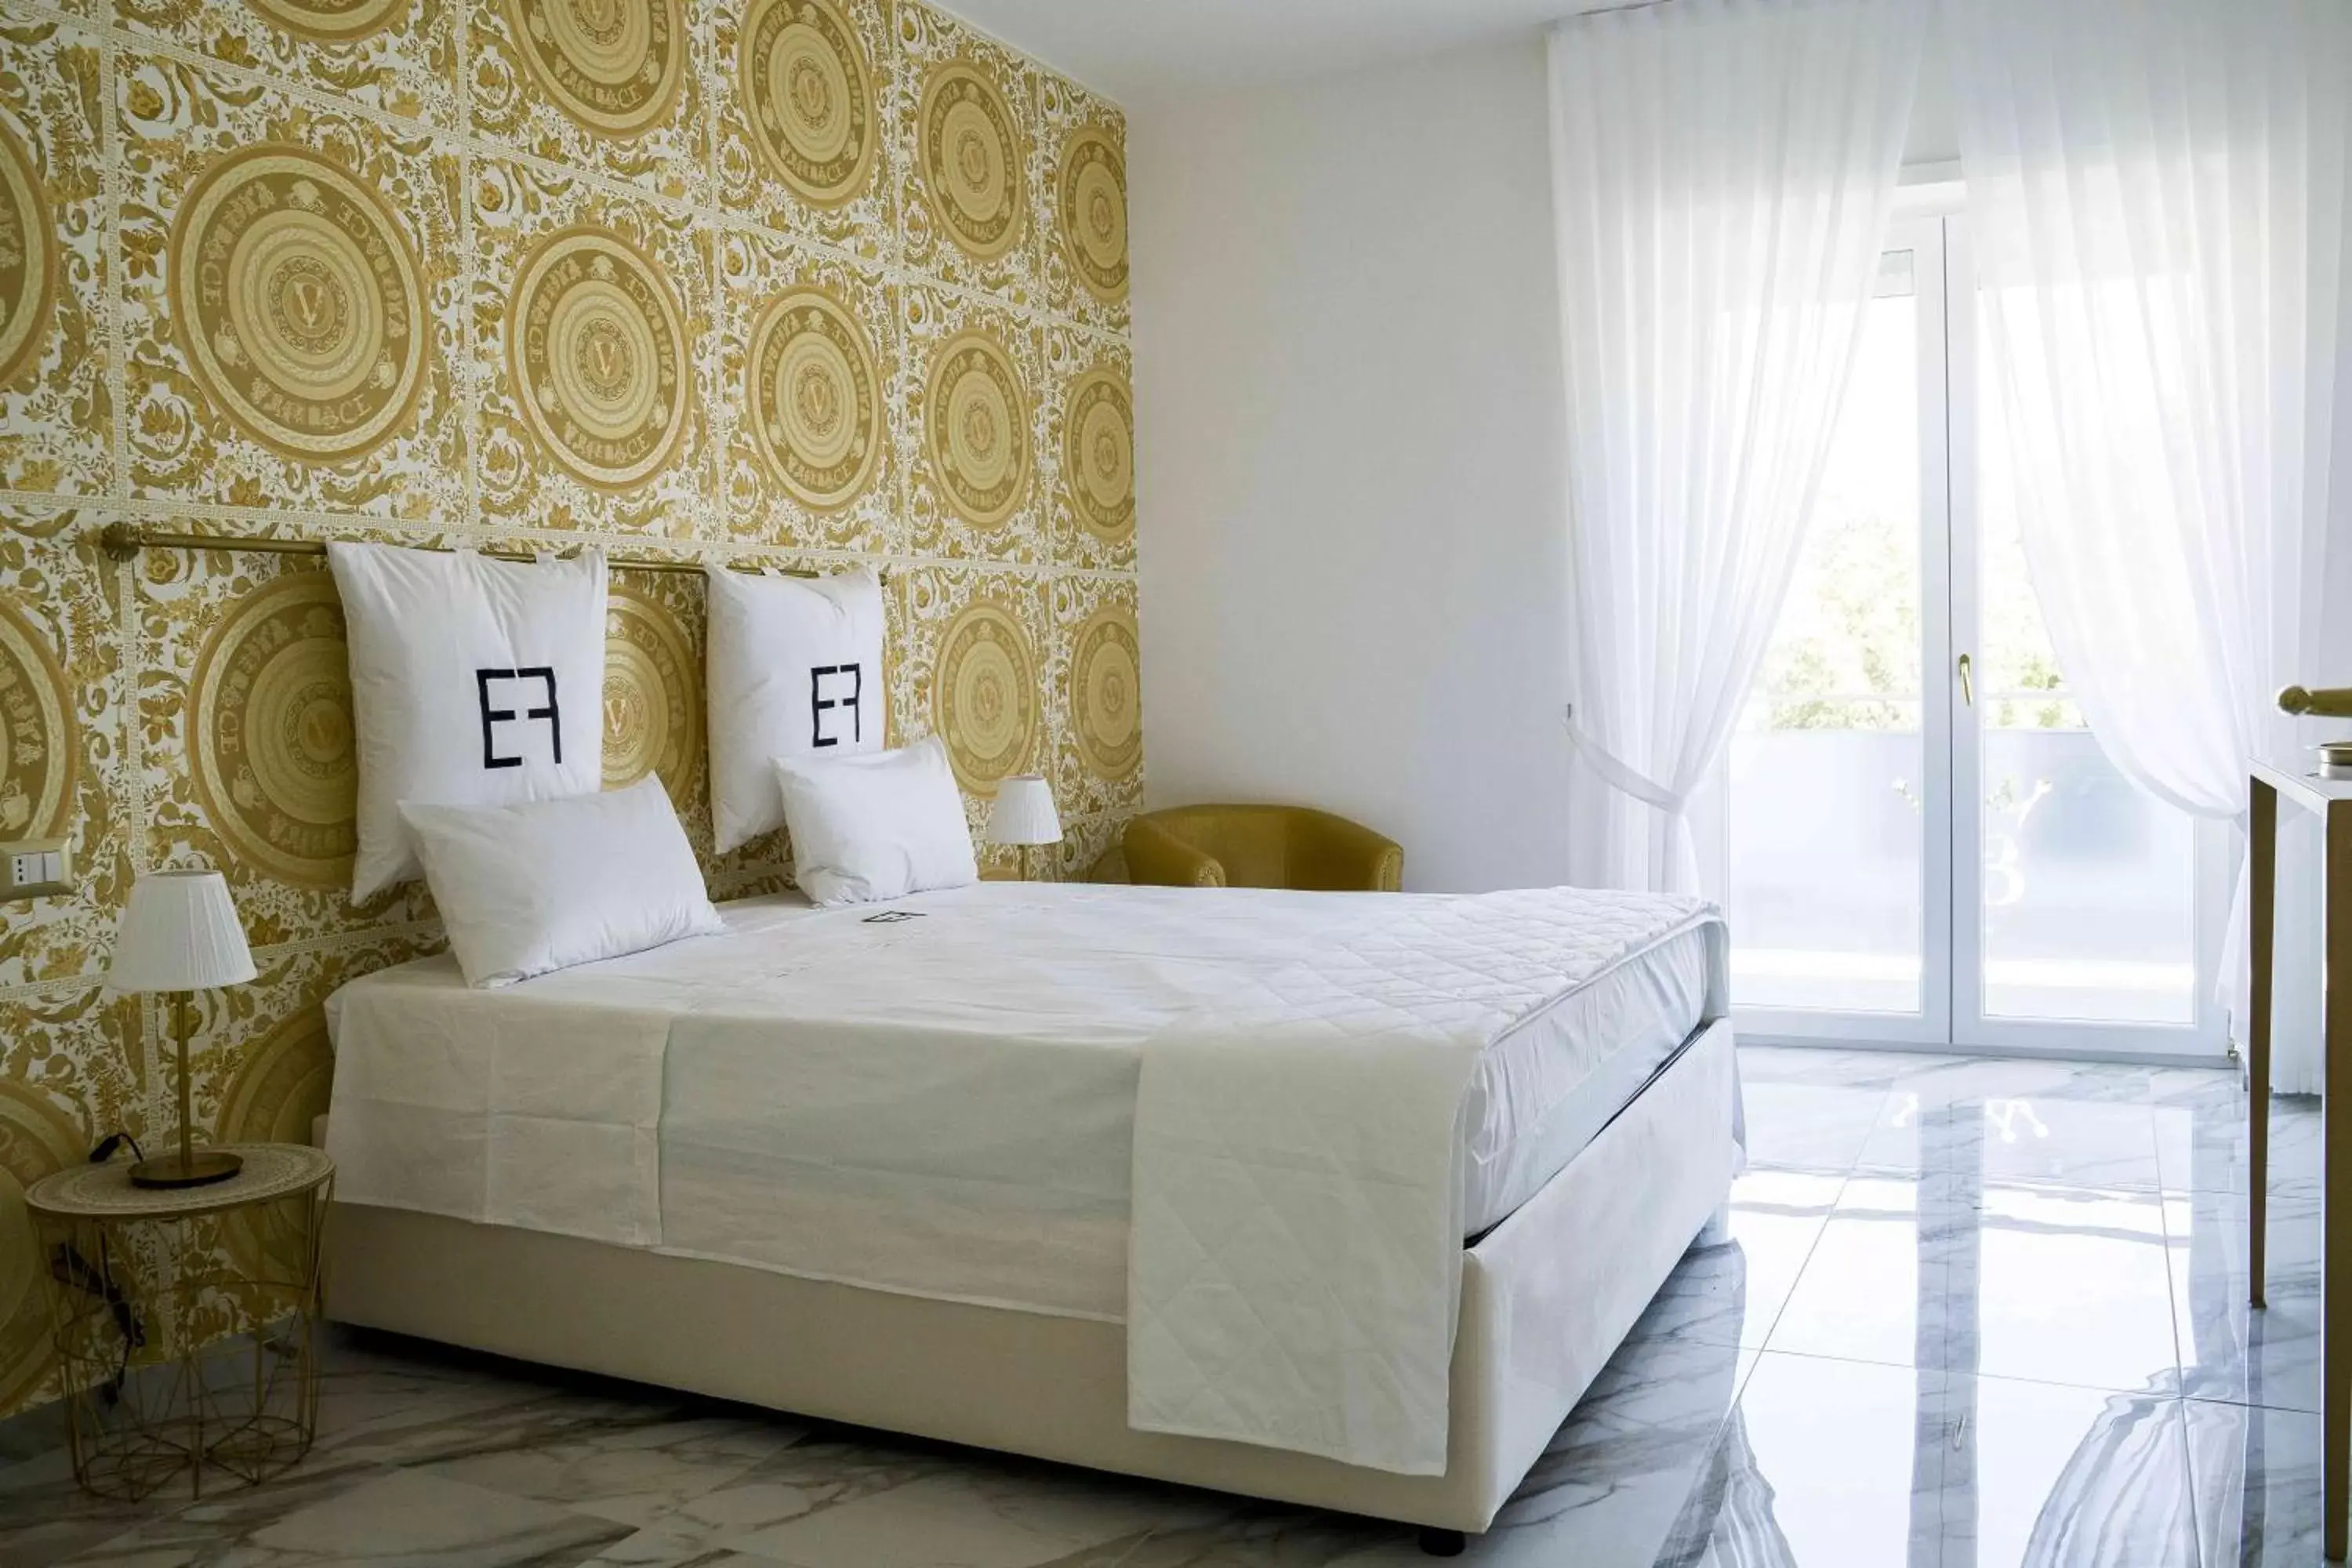 Bed in EF LUXURY LIVING RESORT AND SPA